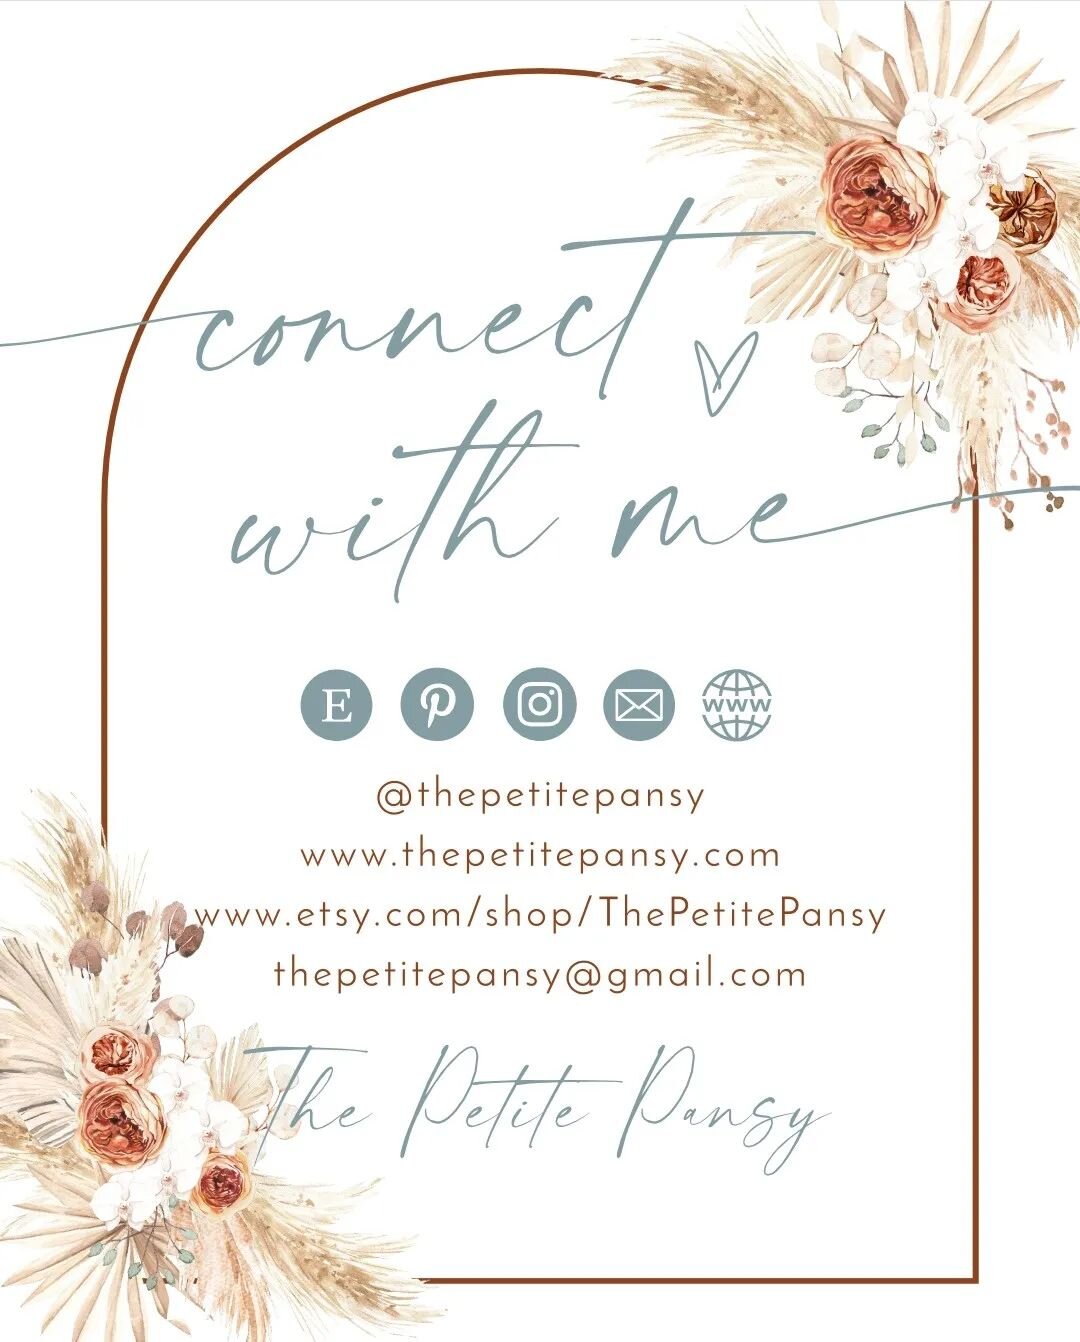 Hello friends!
Wedding season is upon us!
If you or someone you know is getting married or celebrating something special, I can preserve those beautiful bouquets 💐! You can find me at these contacts!
.
.
.
#local #shoplocal #cdawedding #cdaflowers #